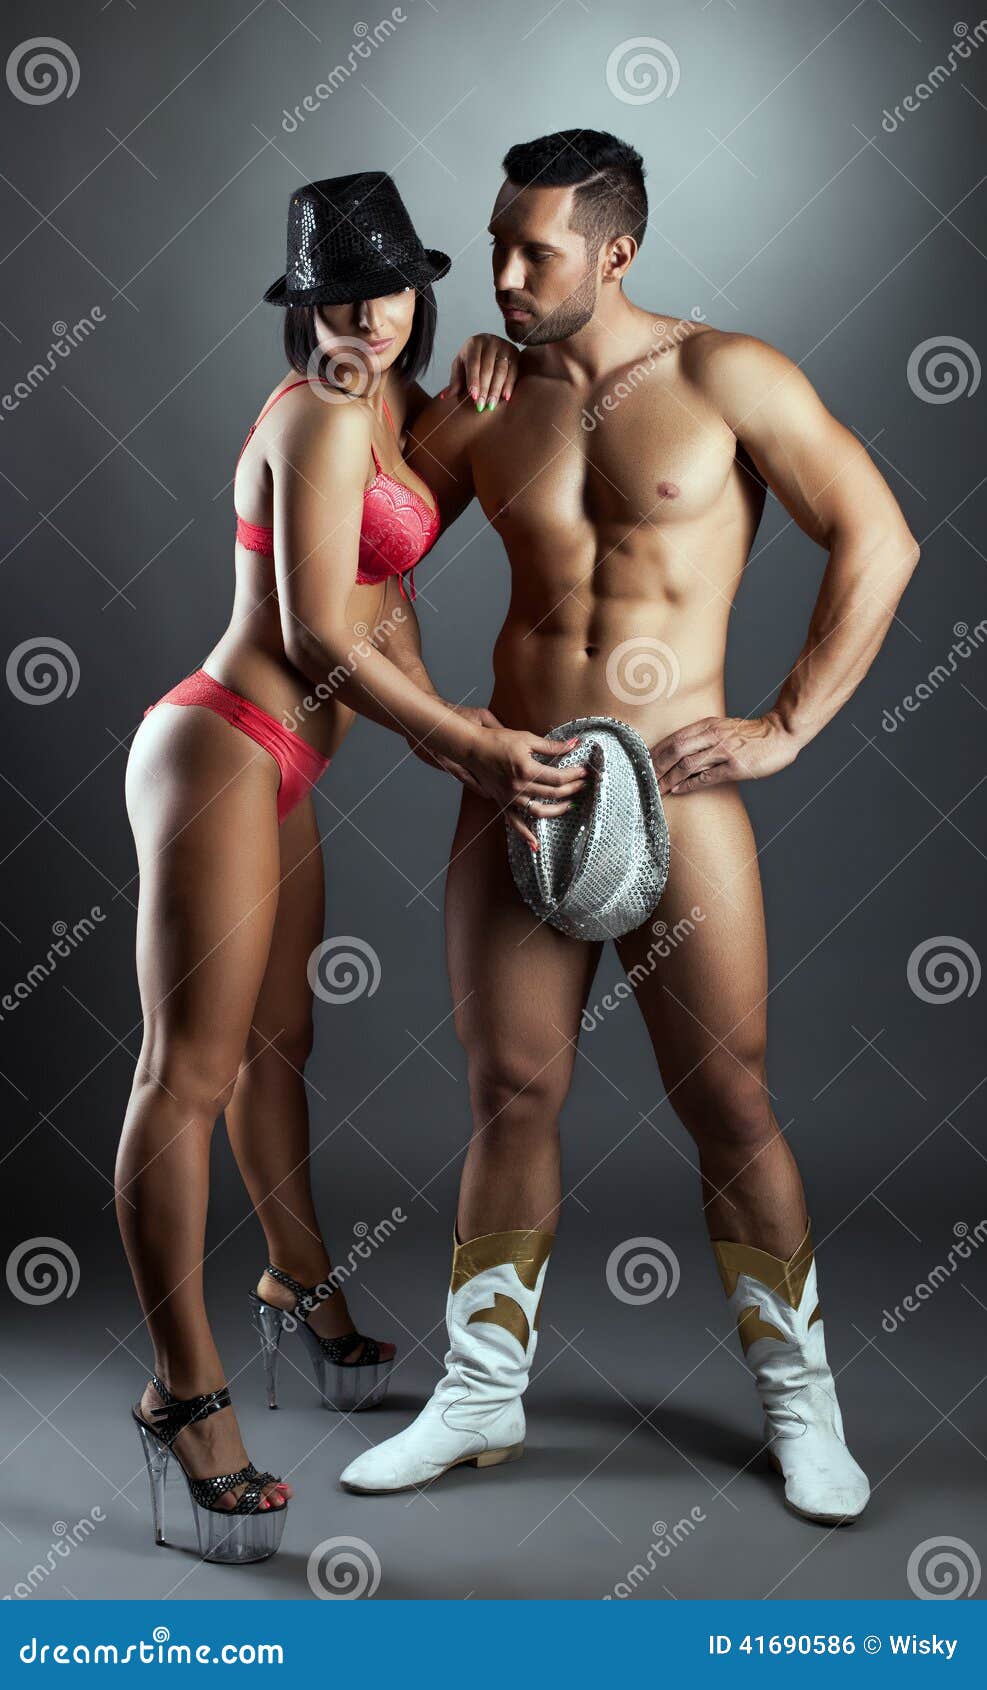 Hot Busty Woman Covers Her Naked Lover with Hat Stock Photo photo